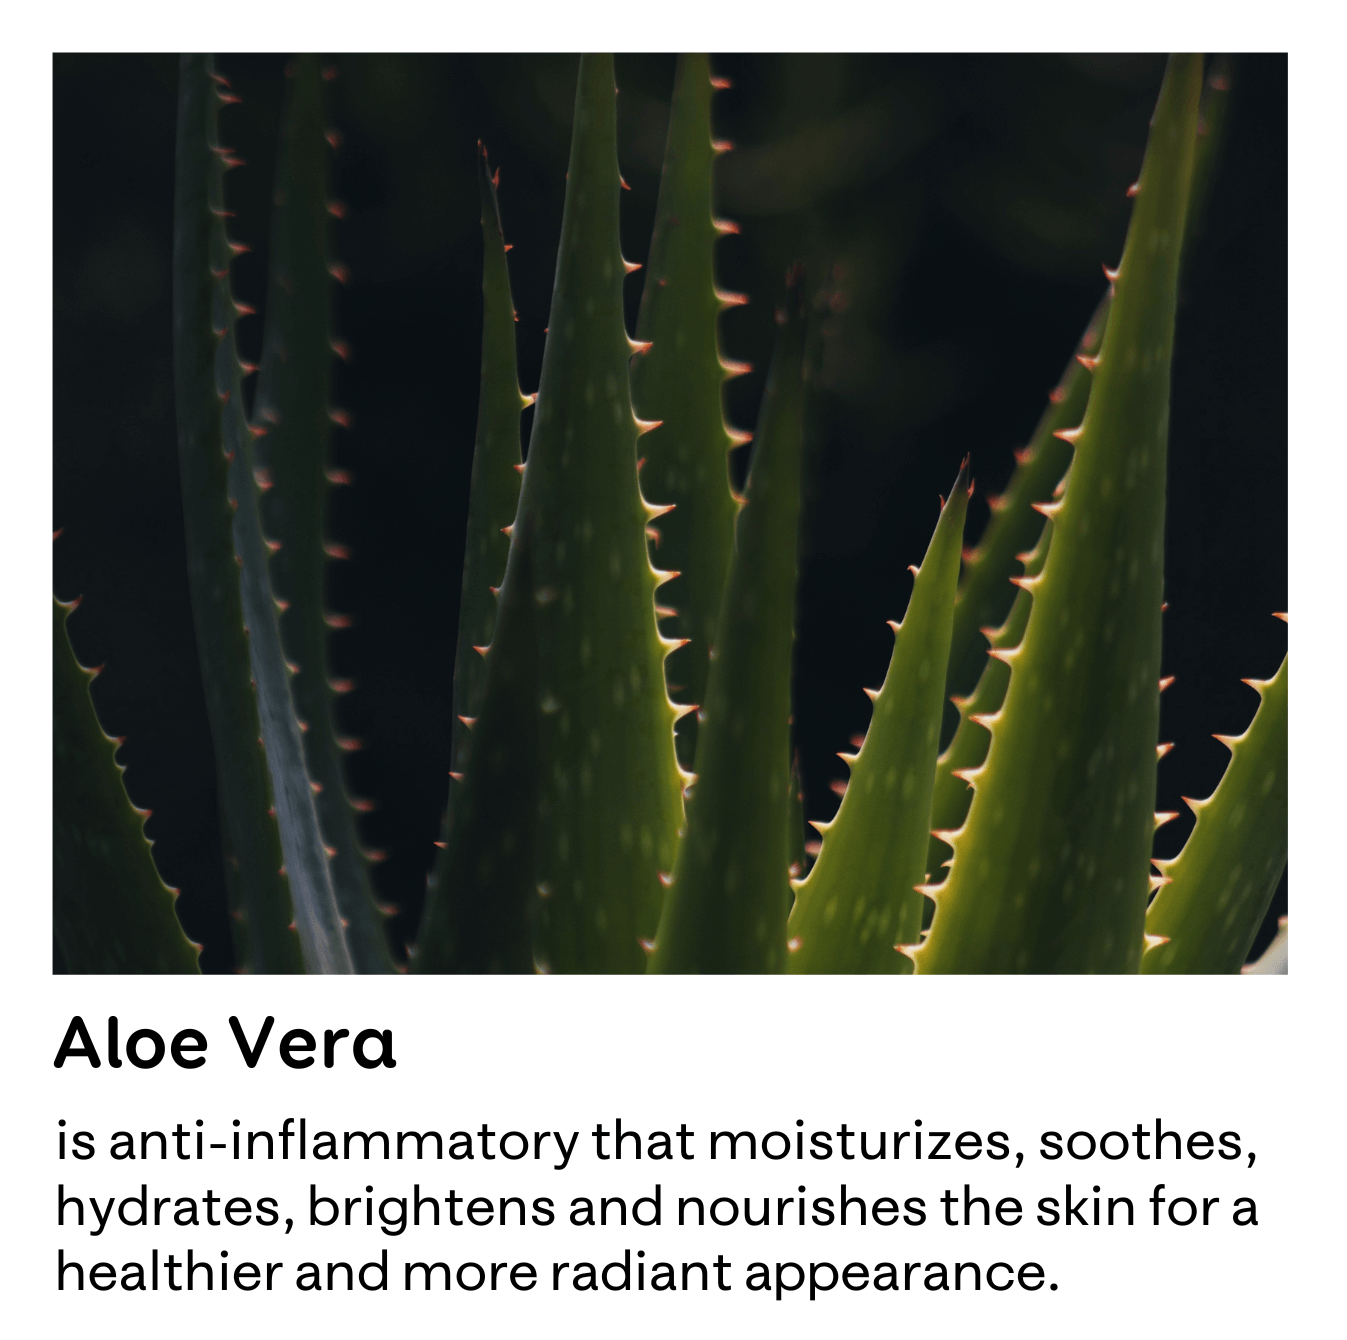 An image of Aloe Vera with information about the benefits that Aloe Vera has on the skin.